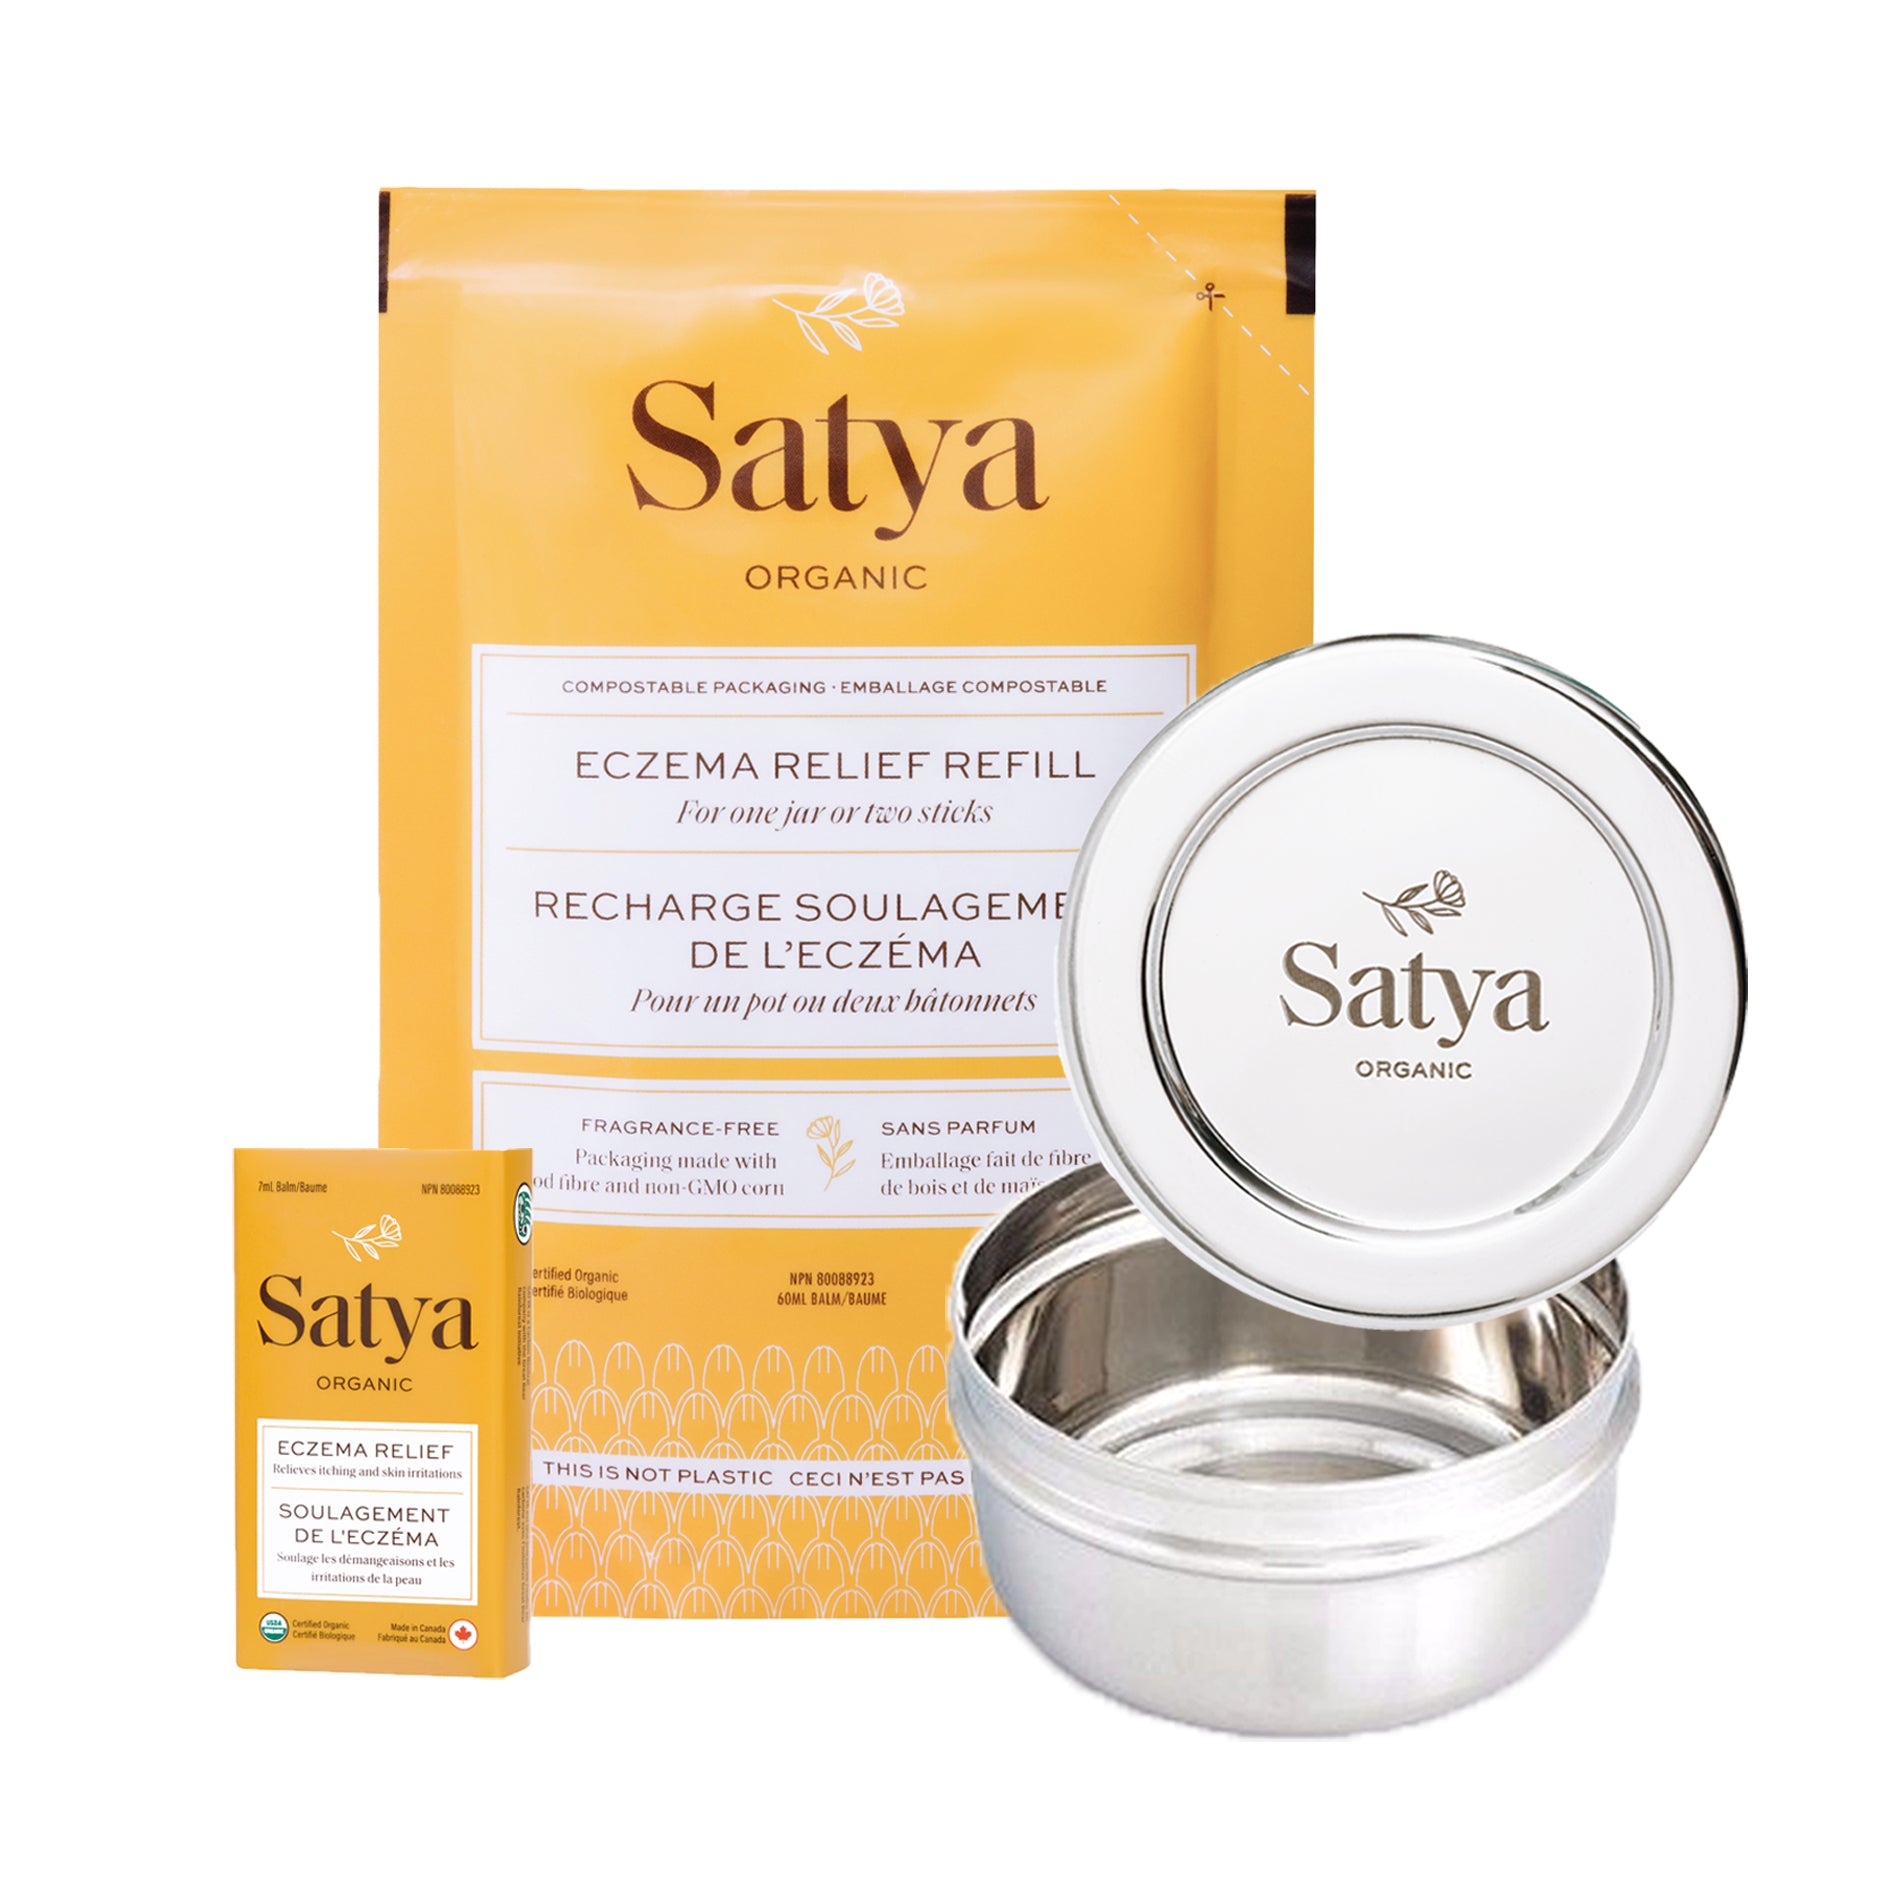 Receive an Eczema Relief Refill Pouch, and Eczema Relief Travel Tin and a Satya Steel with your subscription